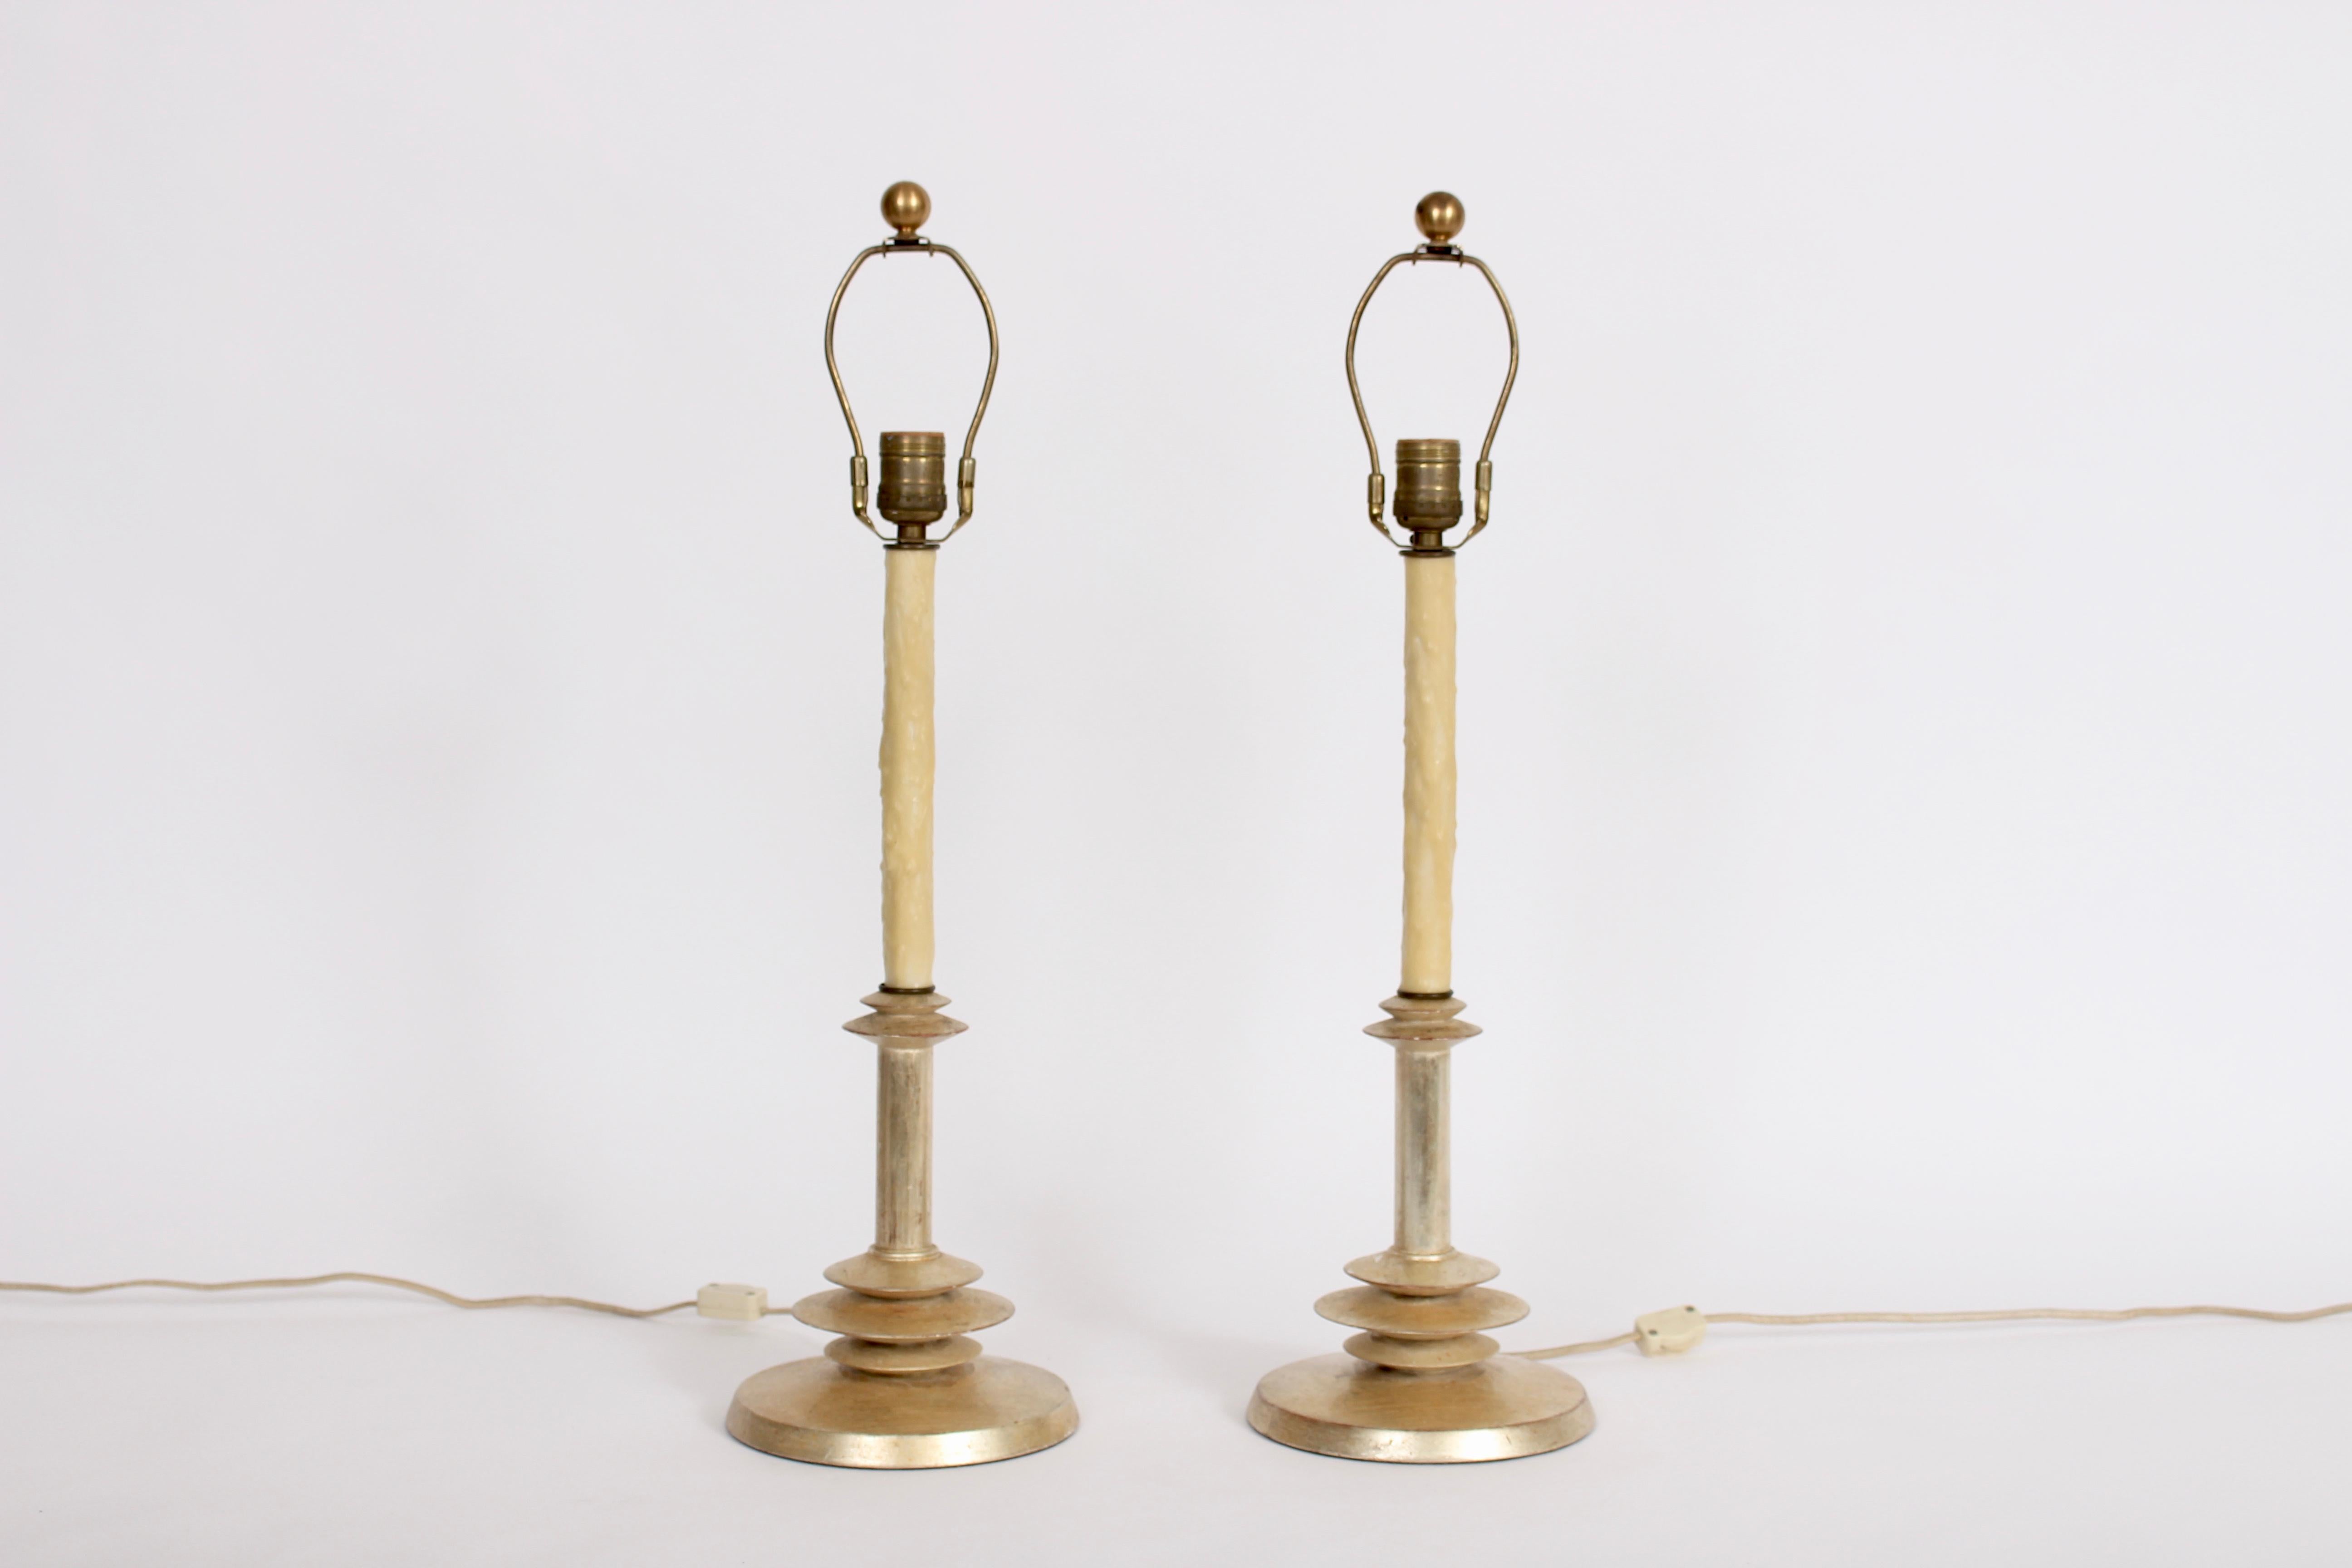 Hollywood Regency Pair of Giacometti Style Gilt and Waxed Candlestick Bedside Lamps, 1940s